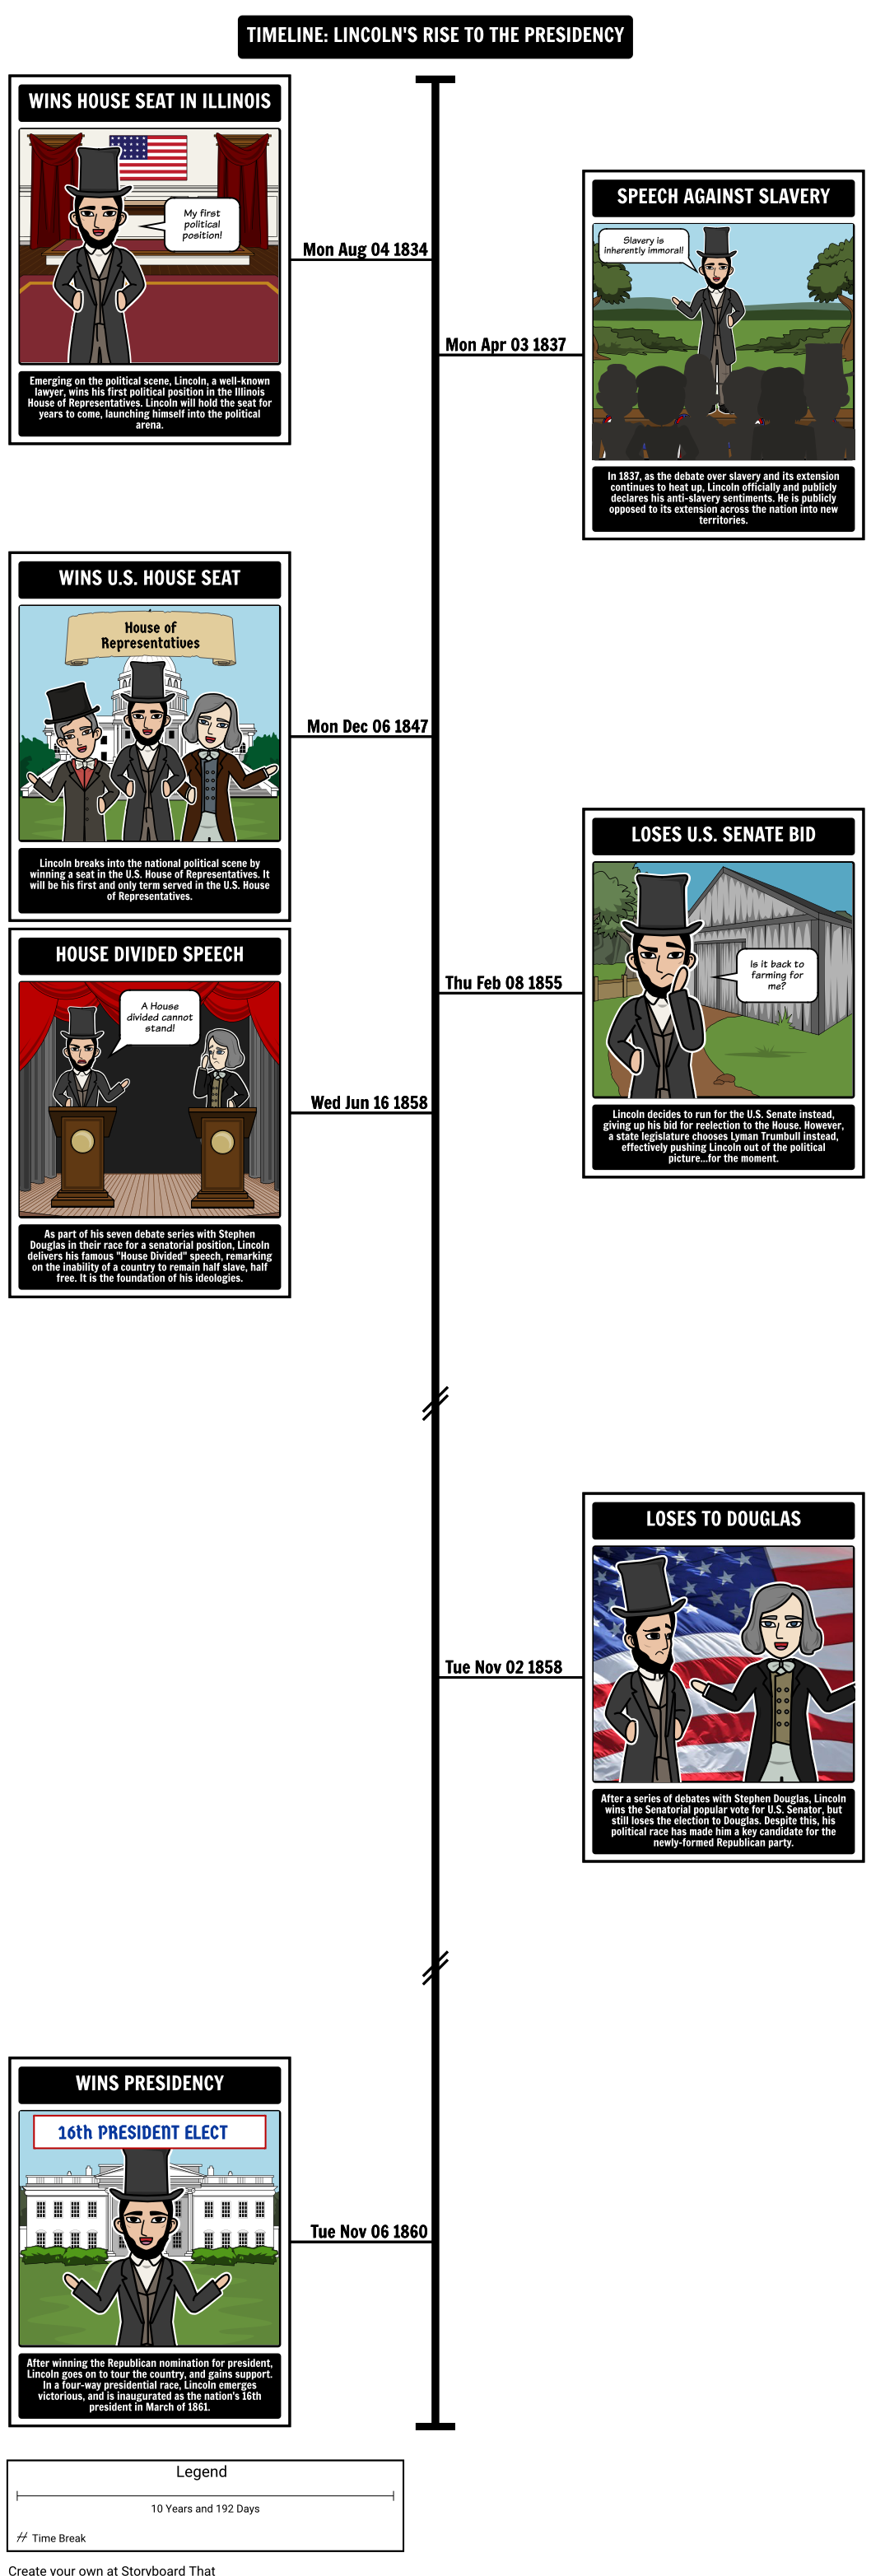 Abraham Lincoln Timeline - Rise to the Presidency